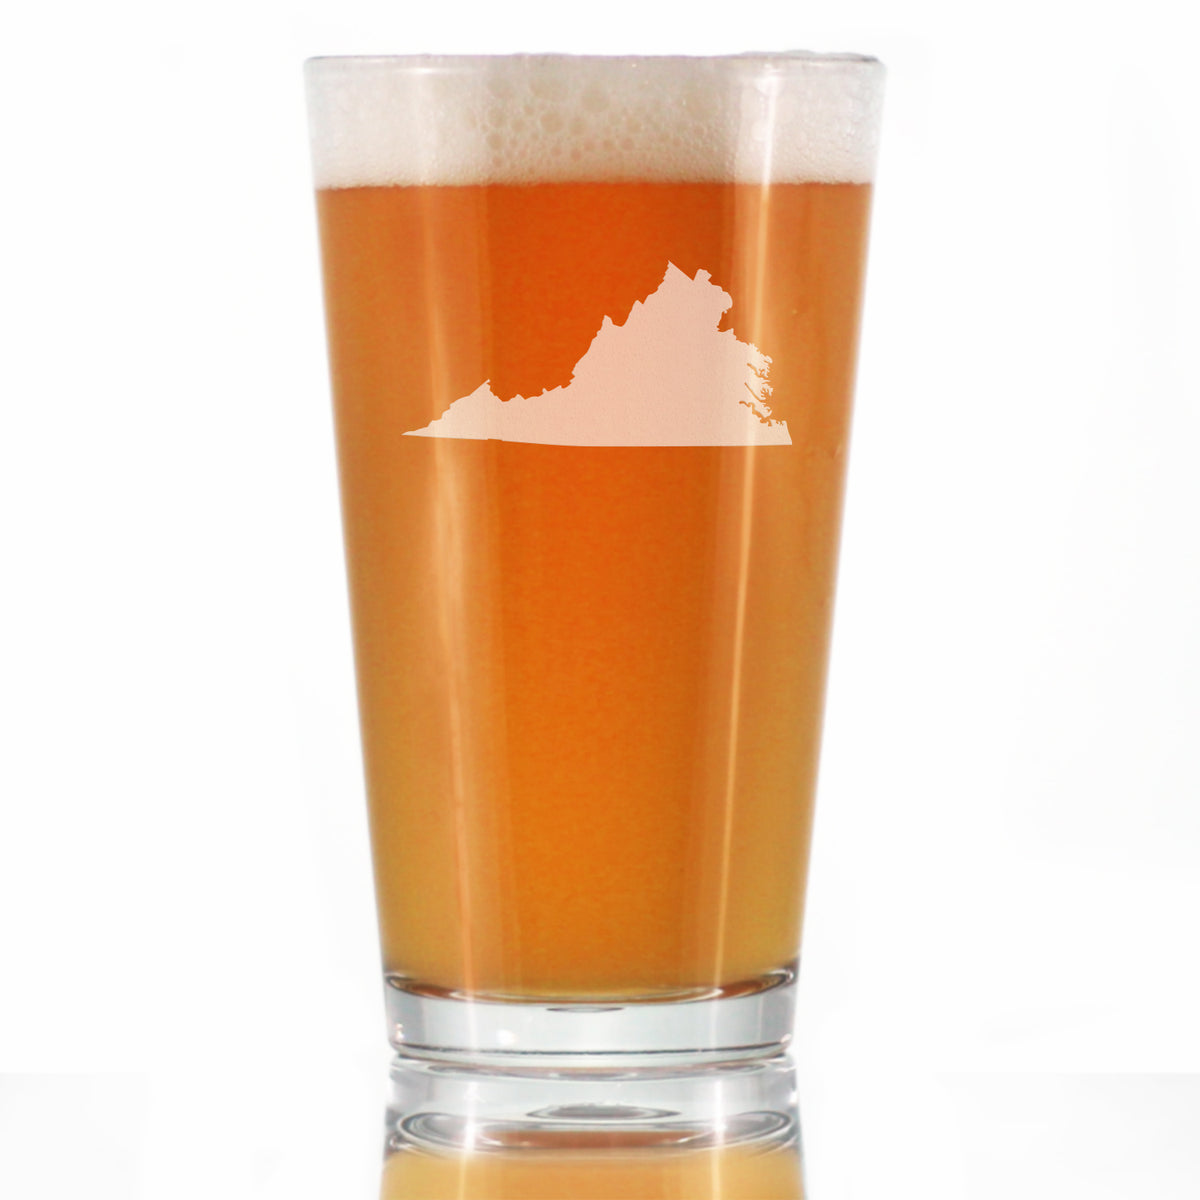 Virginia State Outline Pint Glass for Beer - State Themed Drinking Decor and Gifts for Virginian Women &amp; Men - 16 Oz Glasses